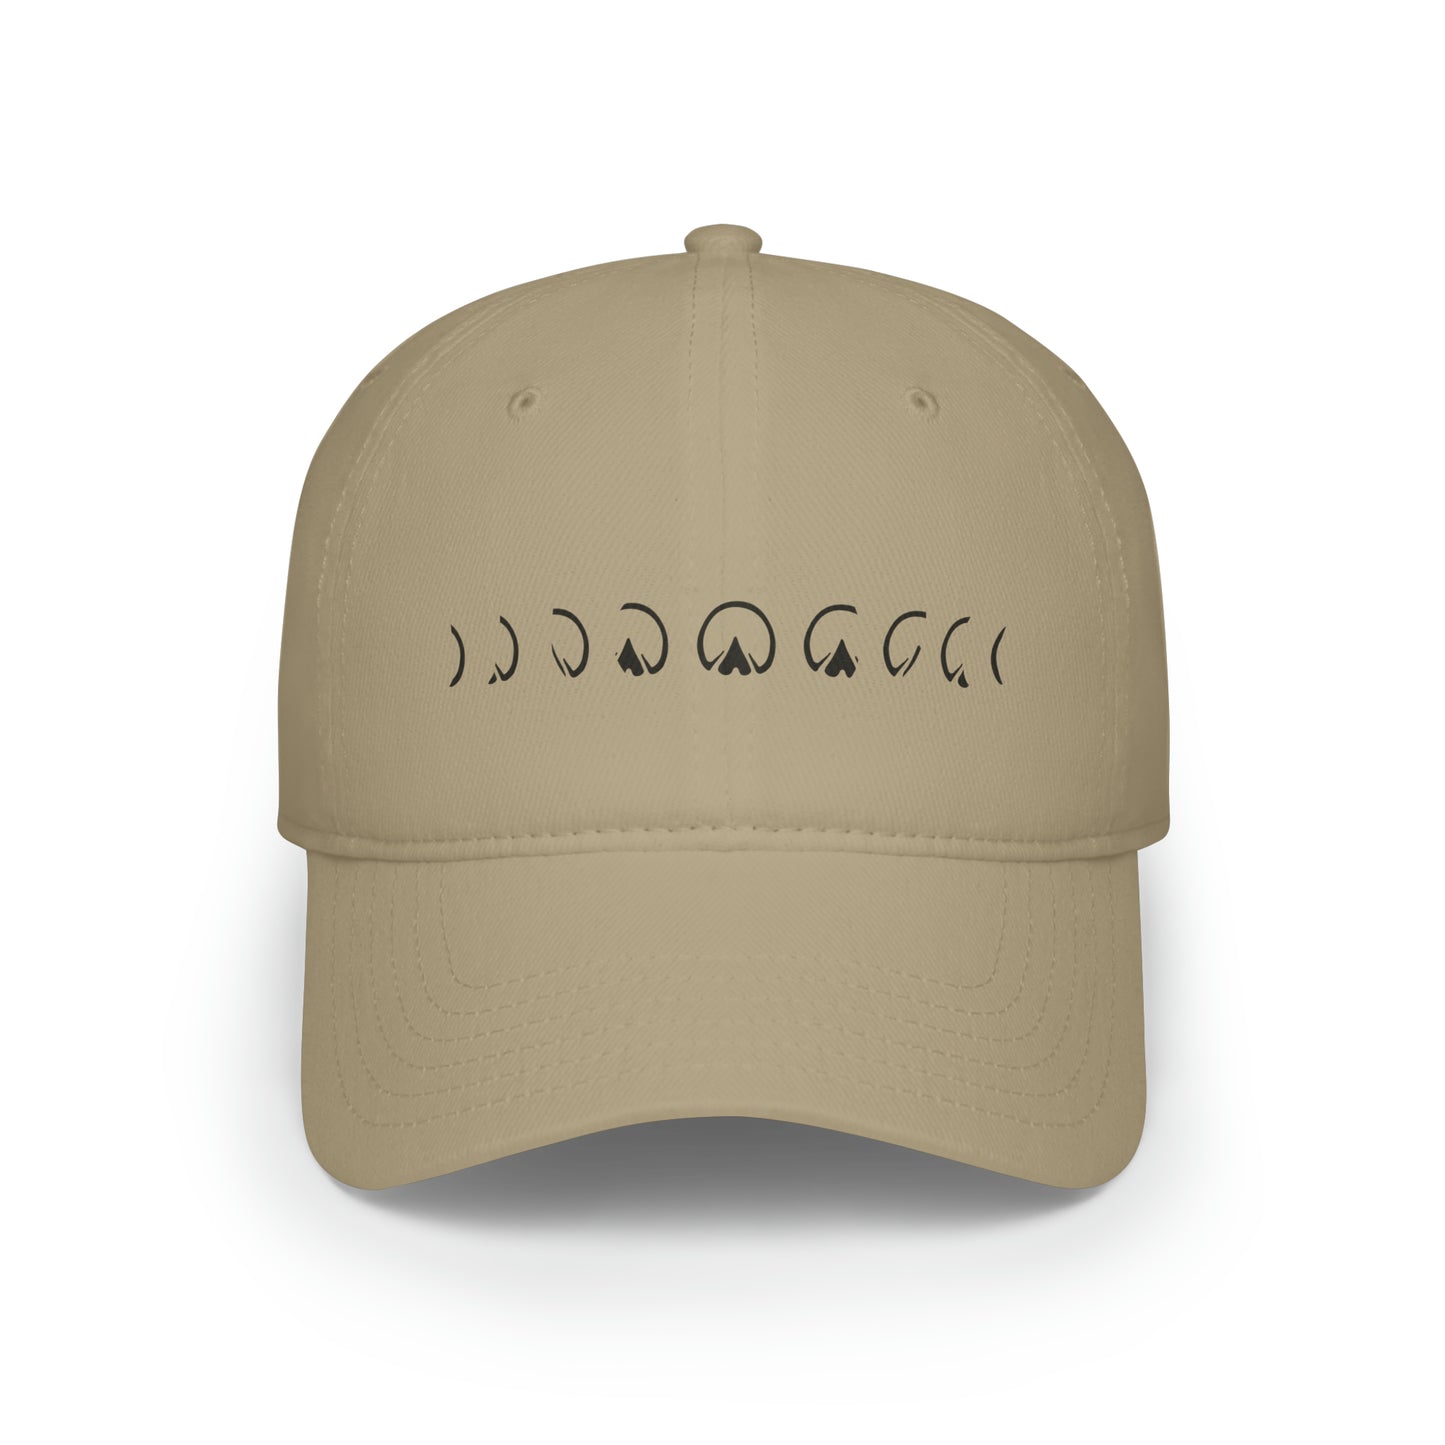 Barefoot Moon Phases Cap